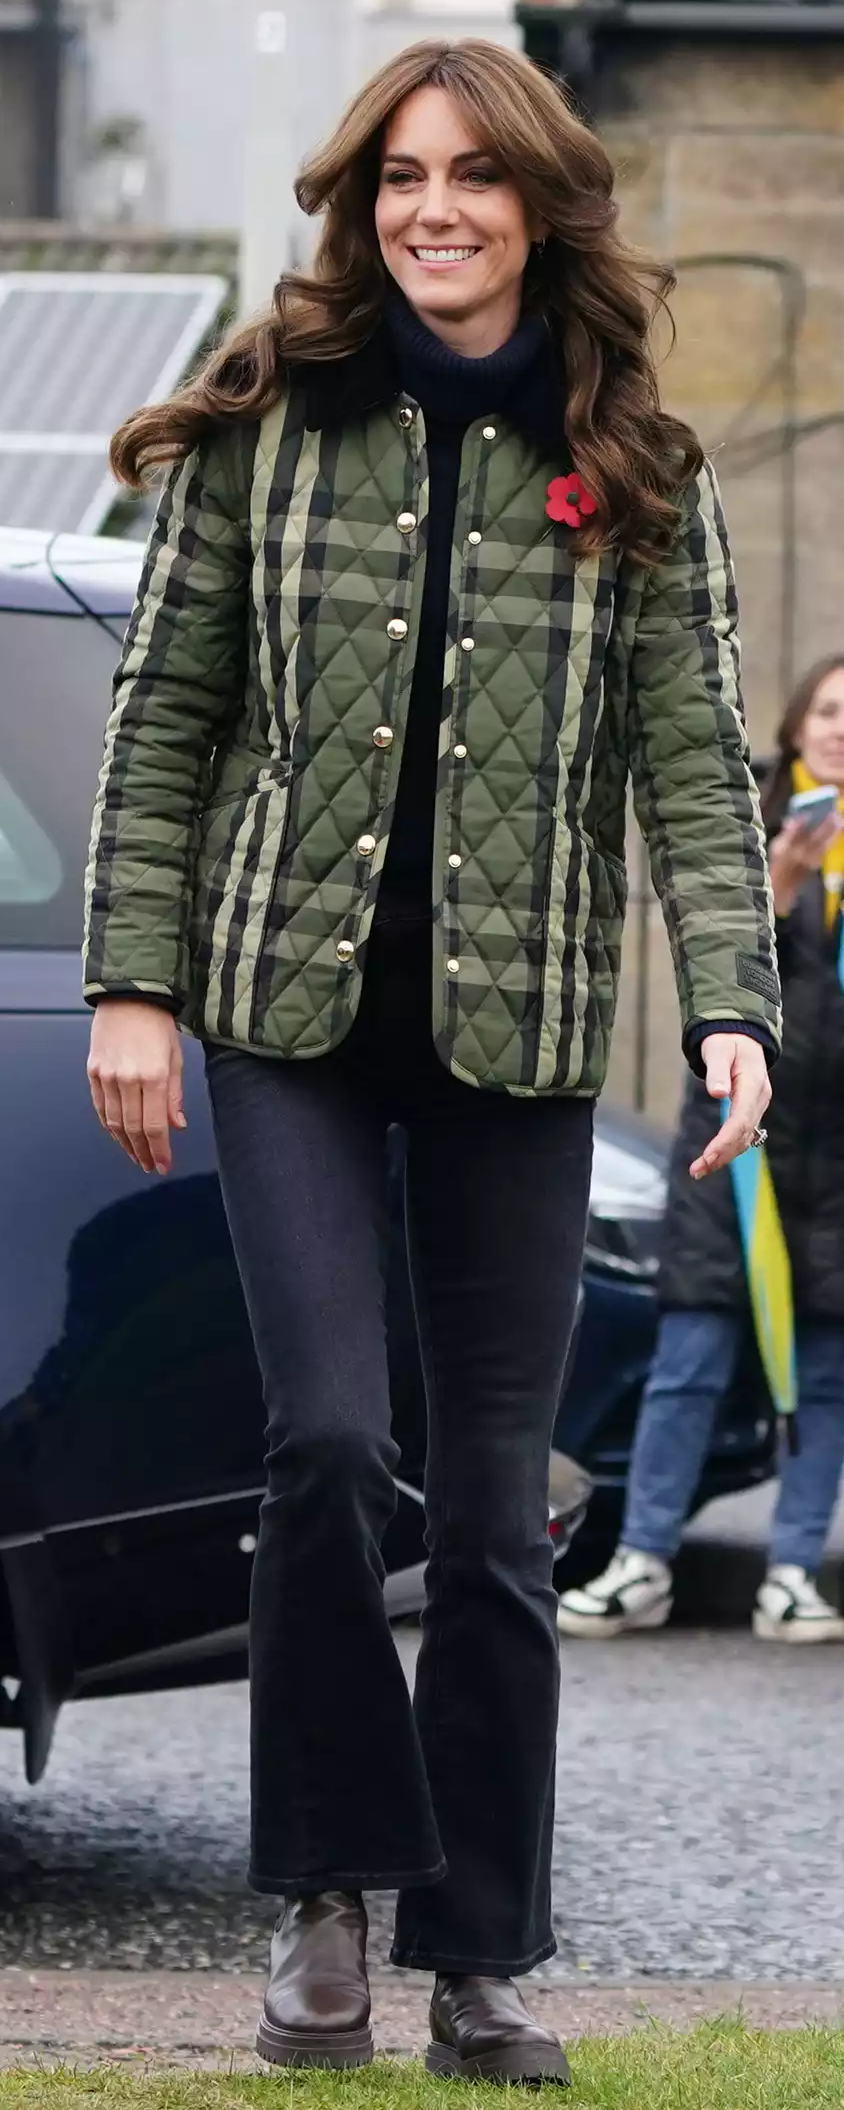 Mother 'The Weekender' Jeans in 'Deep End' Wash as seen on Kate Middleton, Princess of Wales.